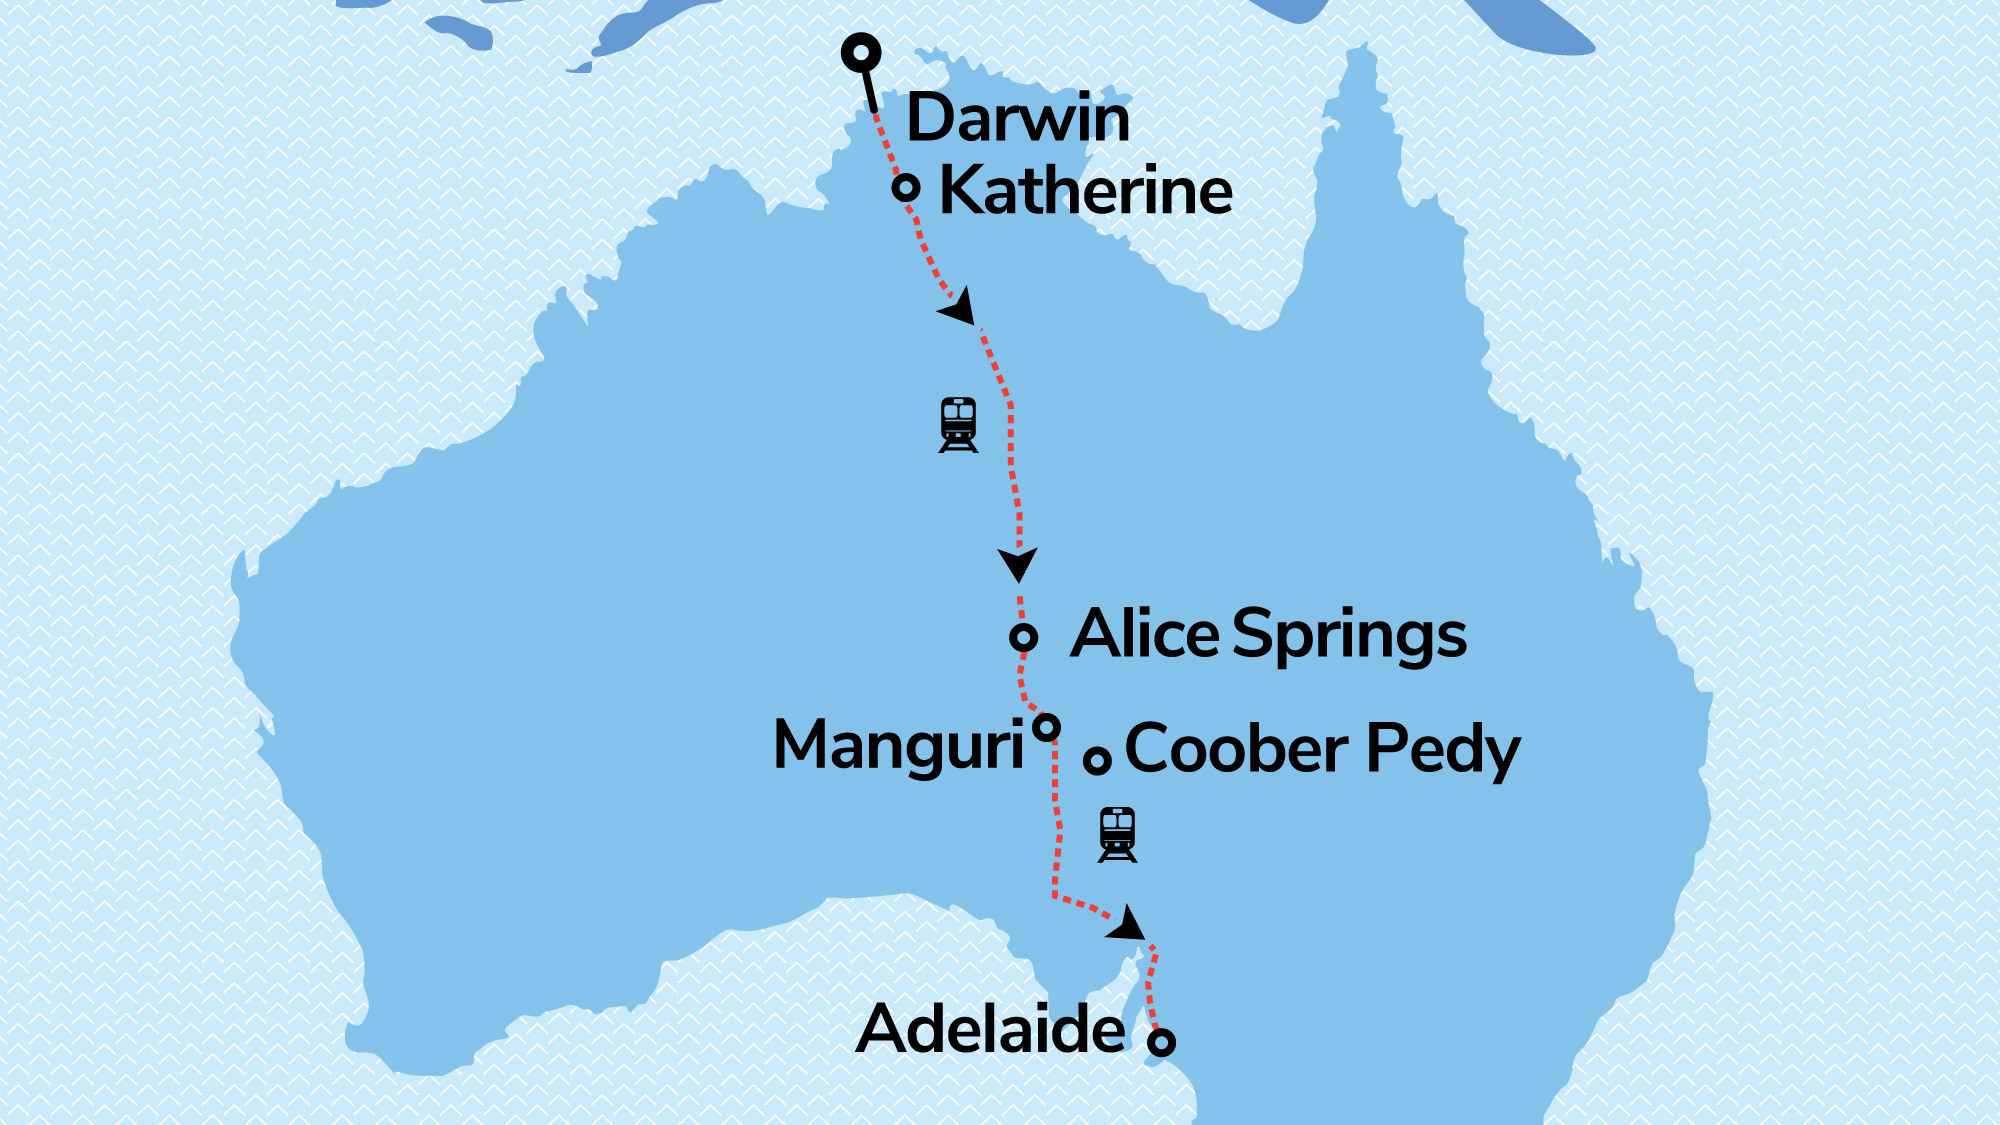 Discover Darwin with The Ghan Expedition